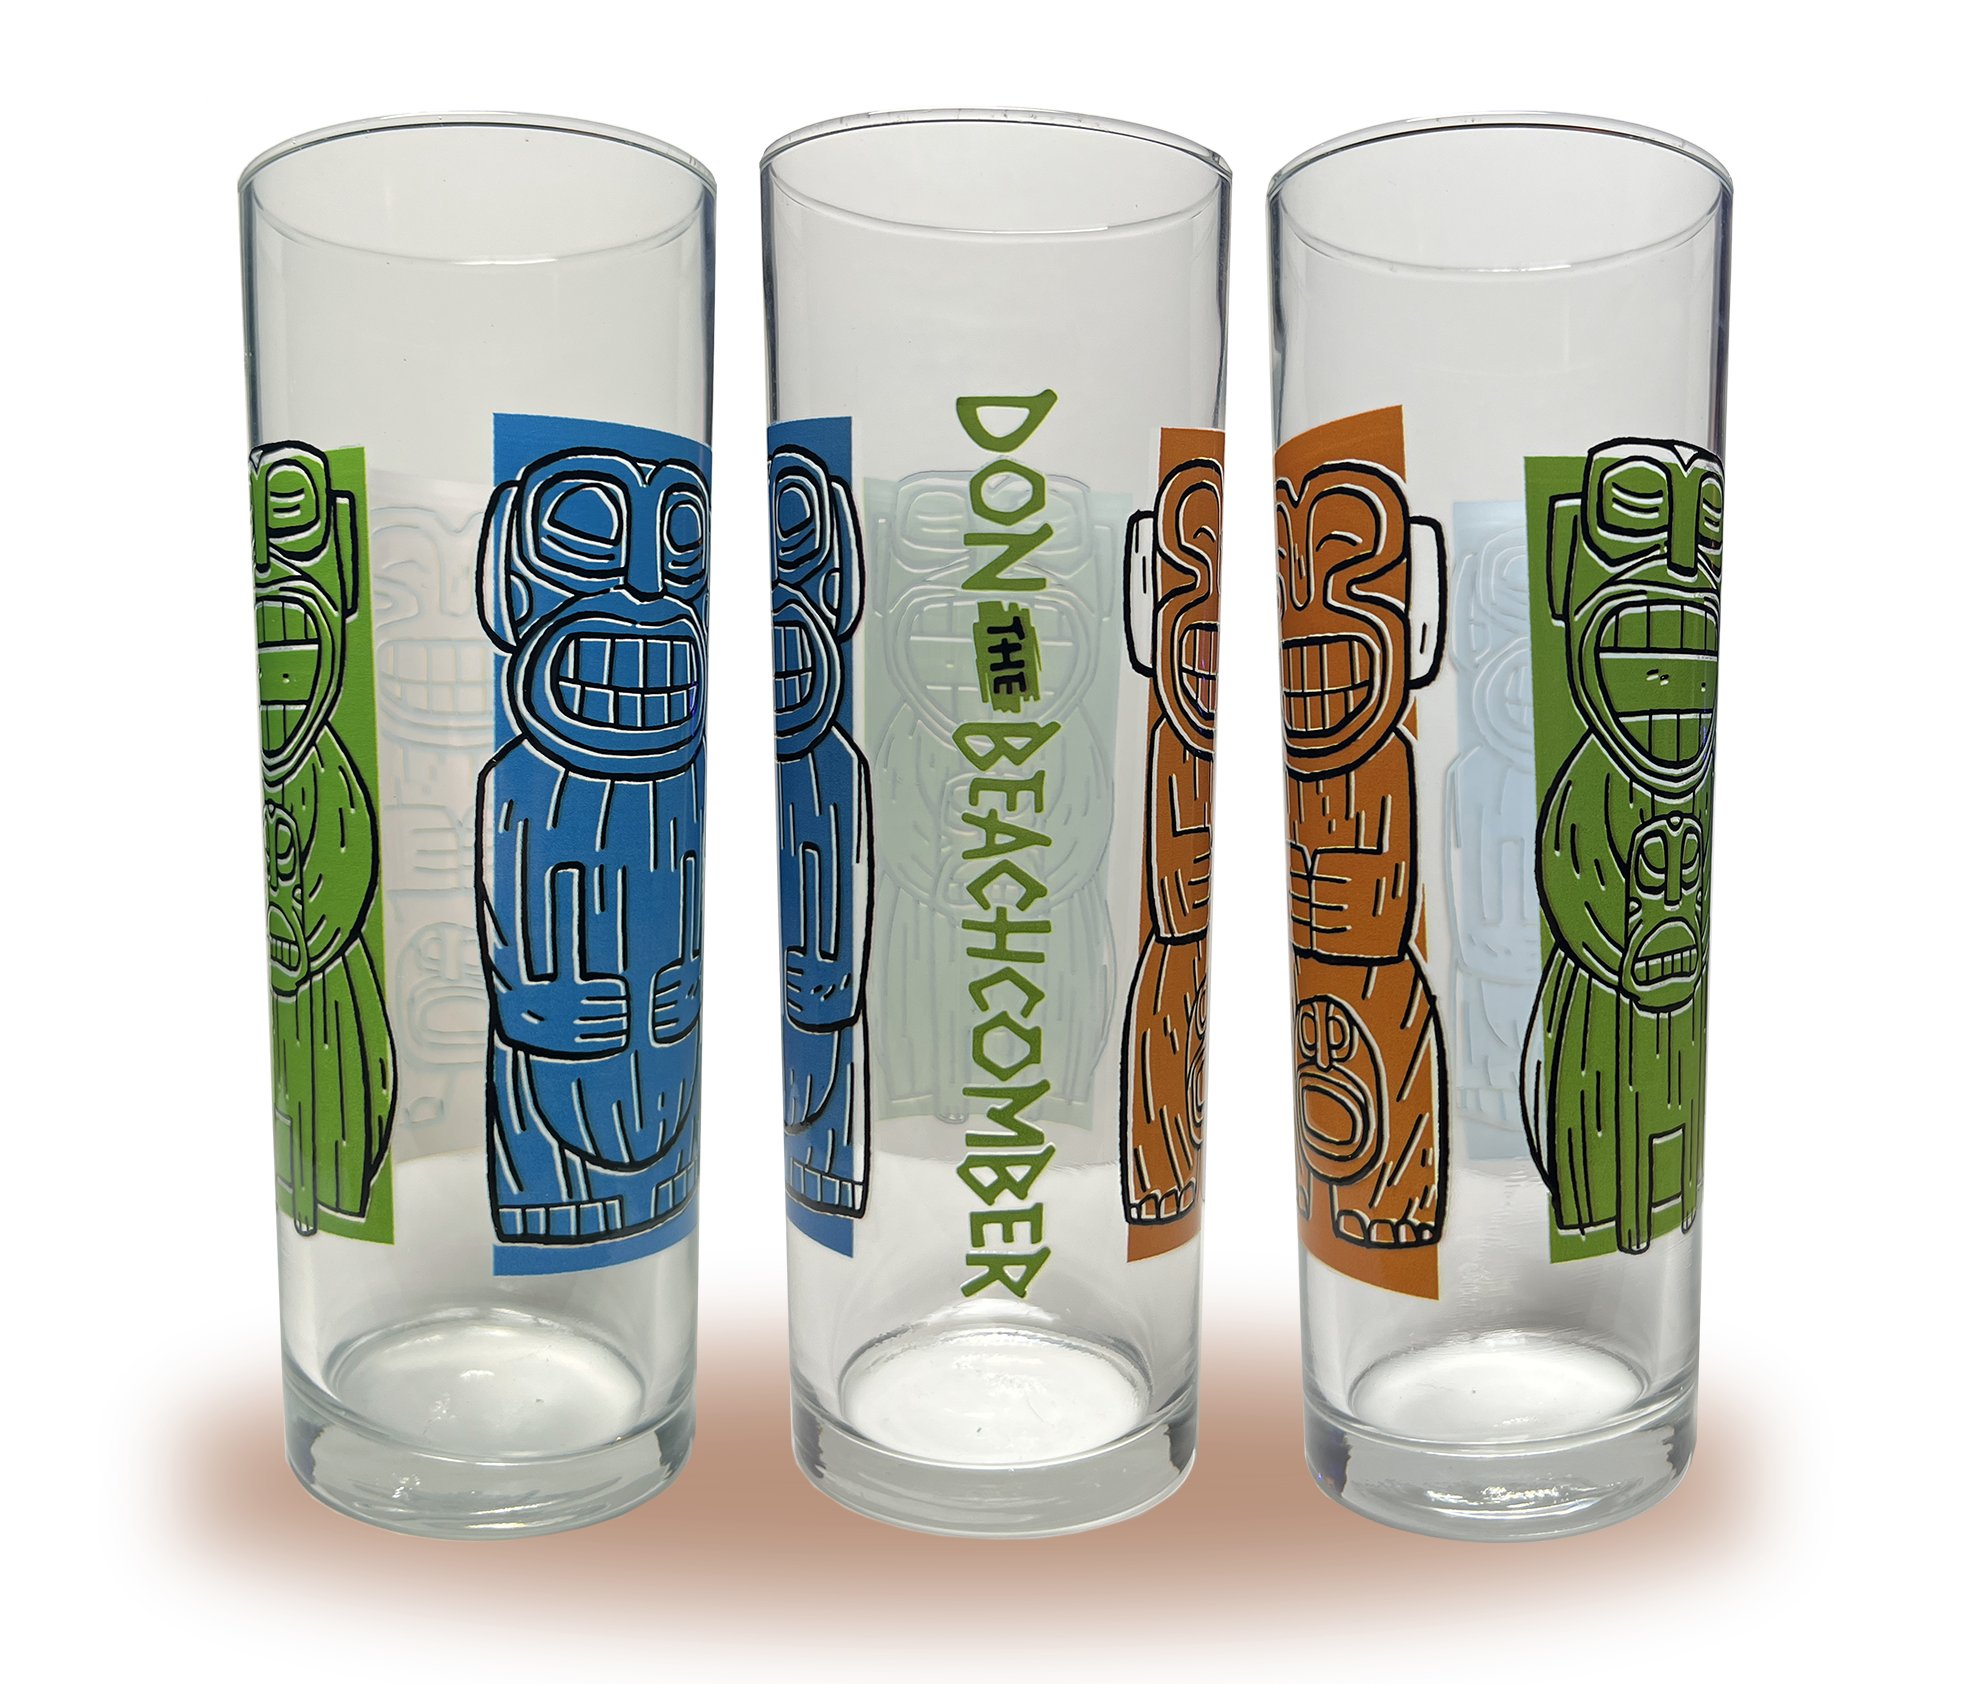 A Zombie glass with three cannibal figures colored orange, green, and blue next to “Don the Beachcomber” written on the side.